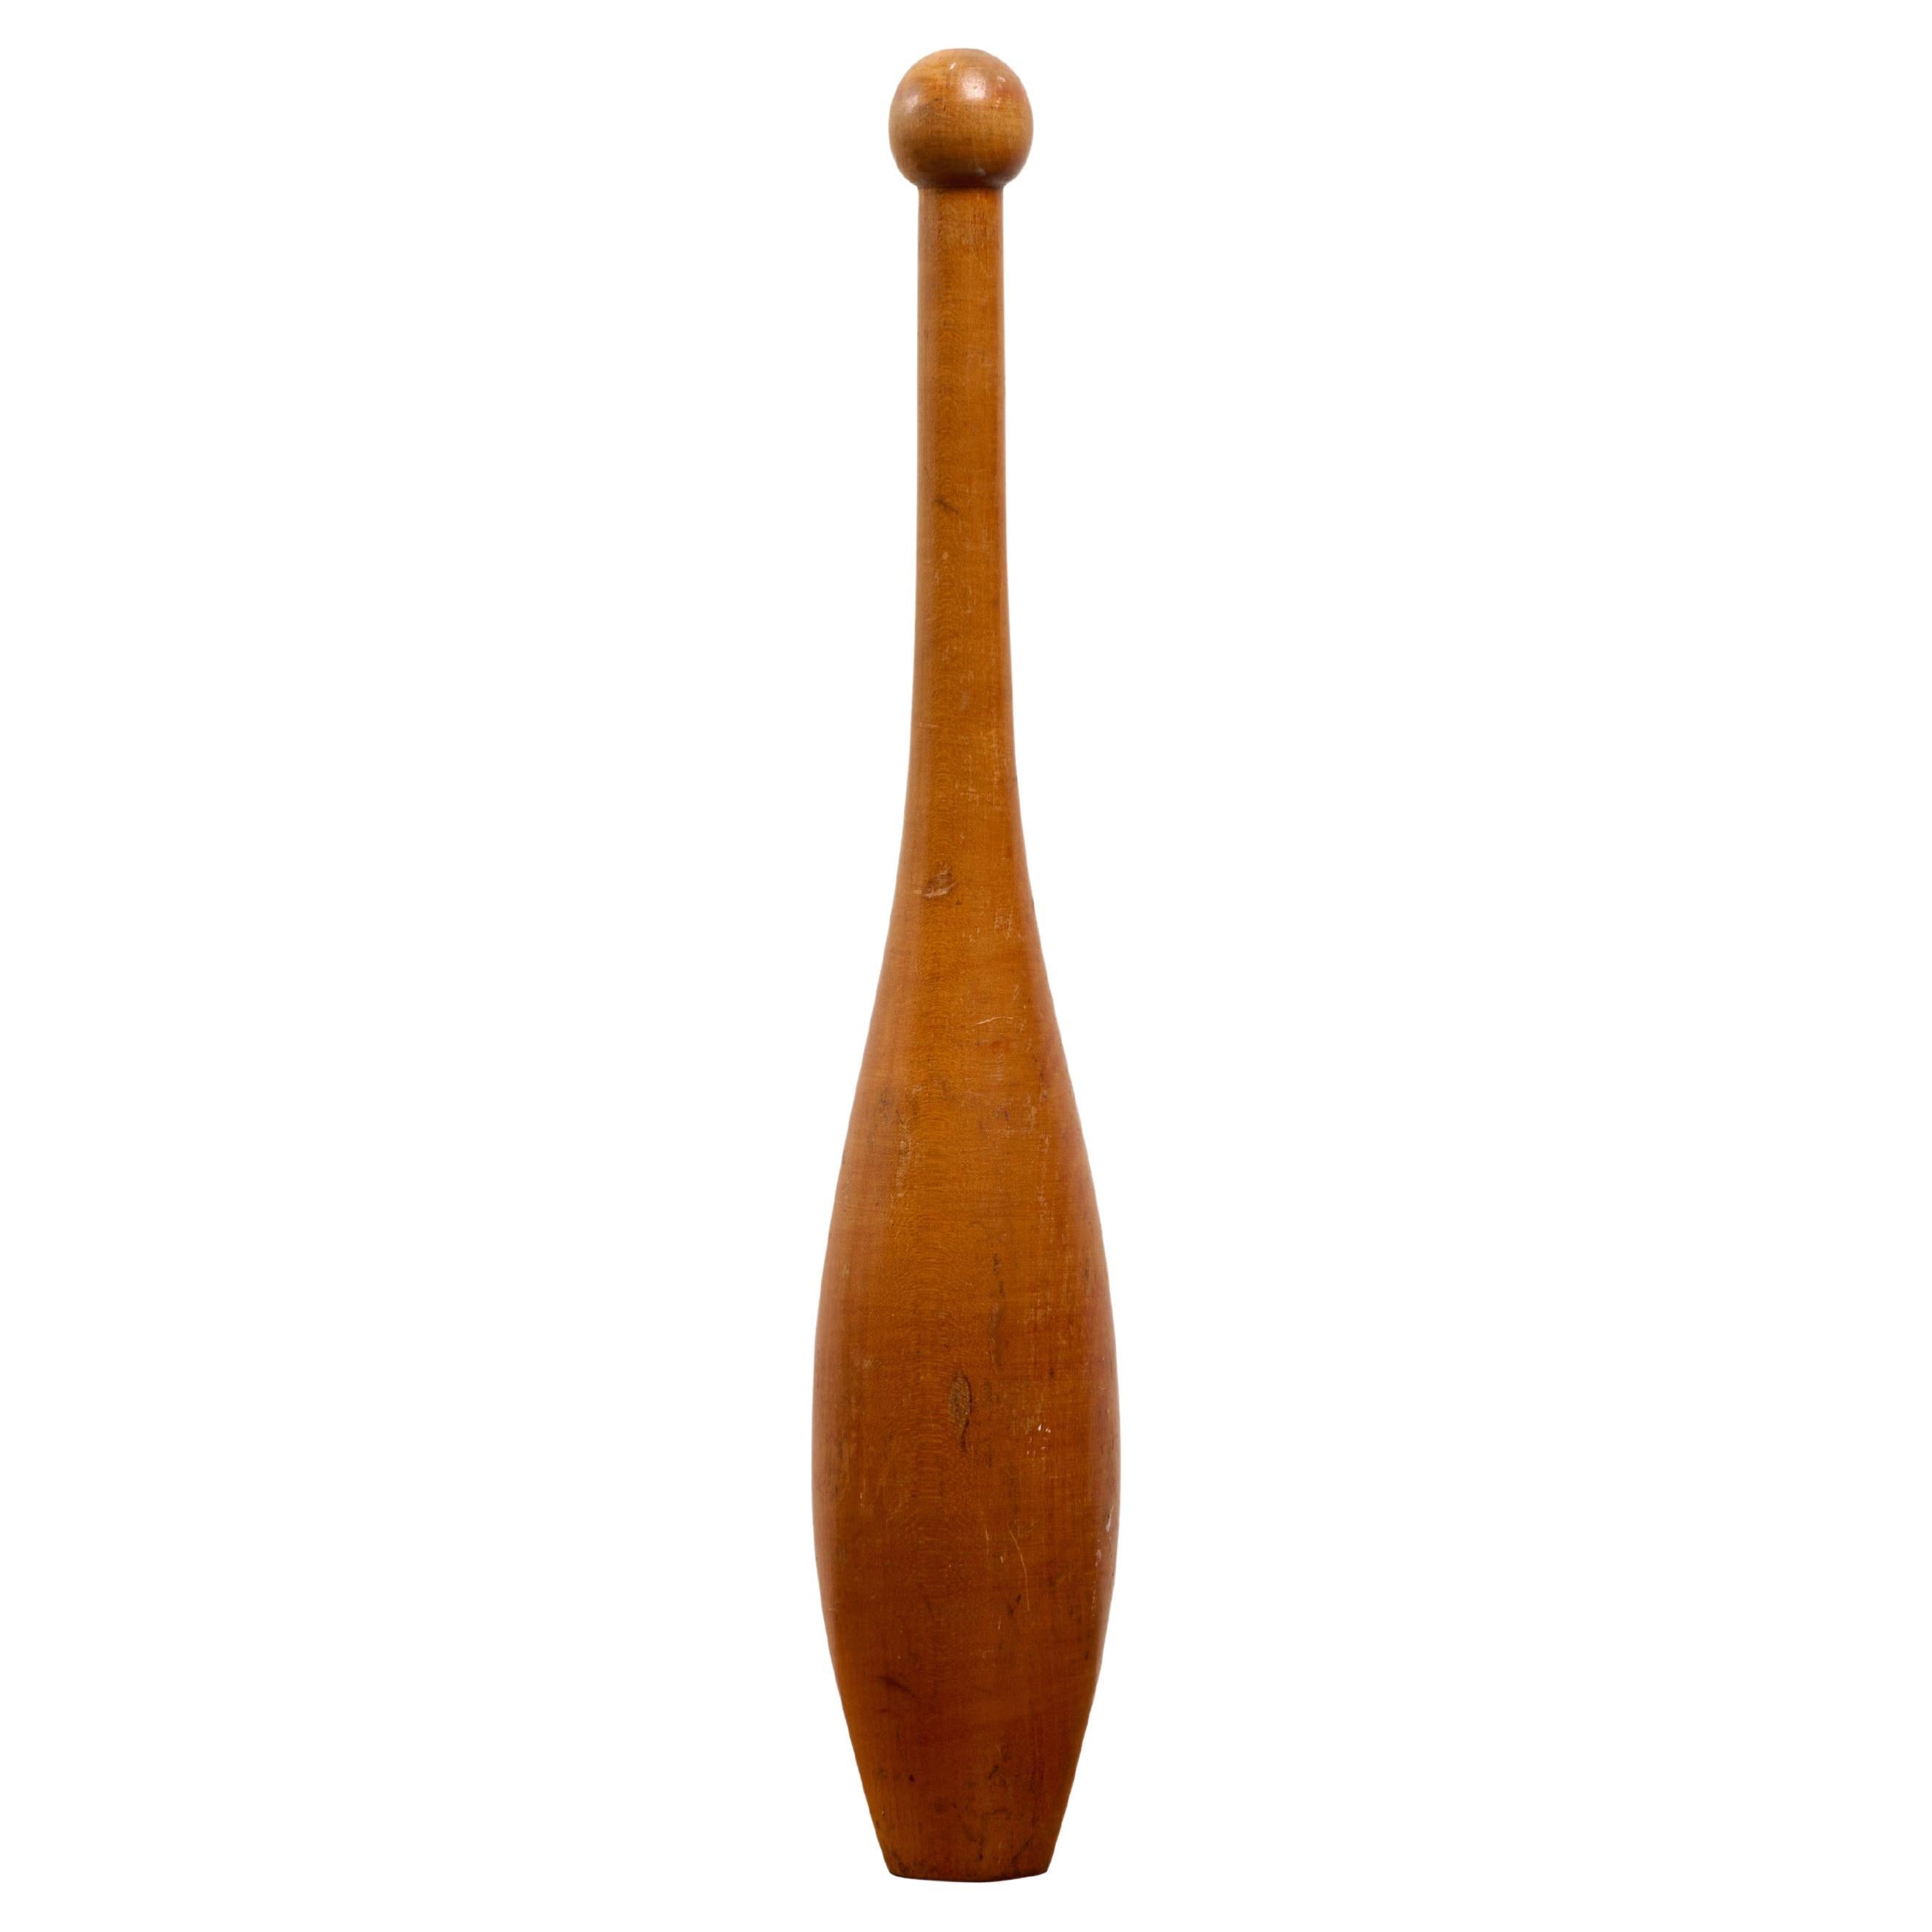 Wood juggling pin  - made by Spalding.